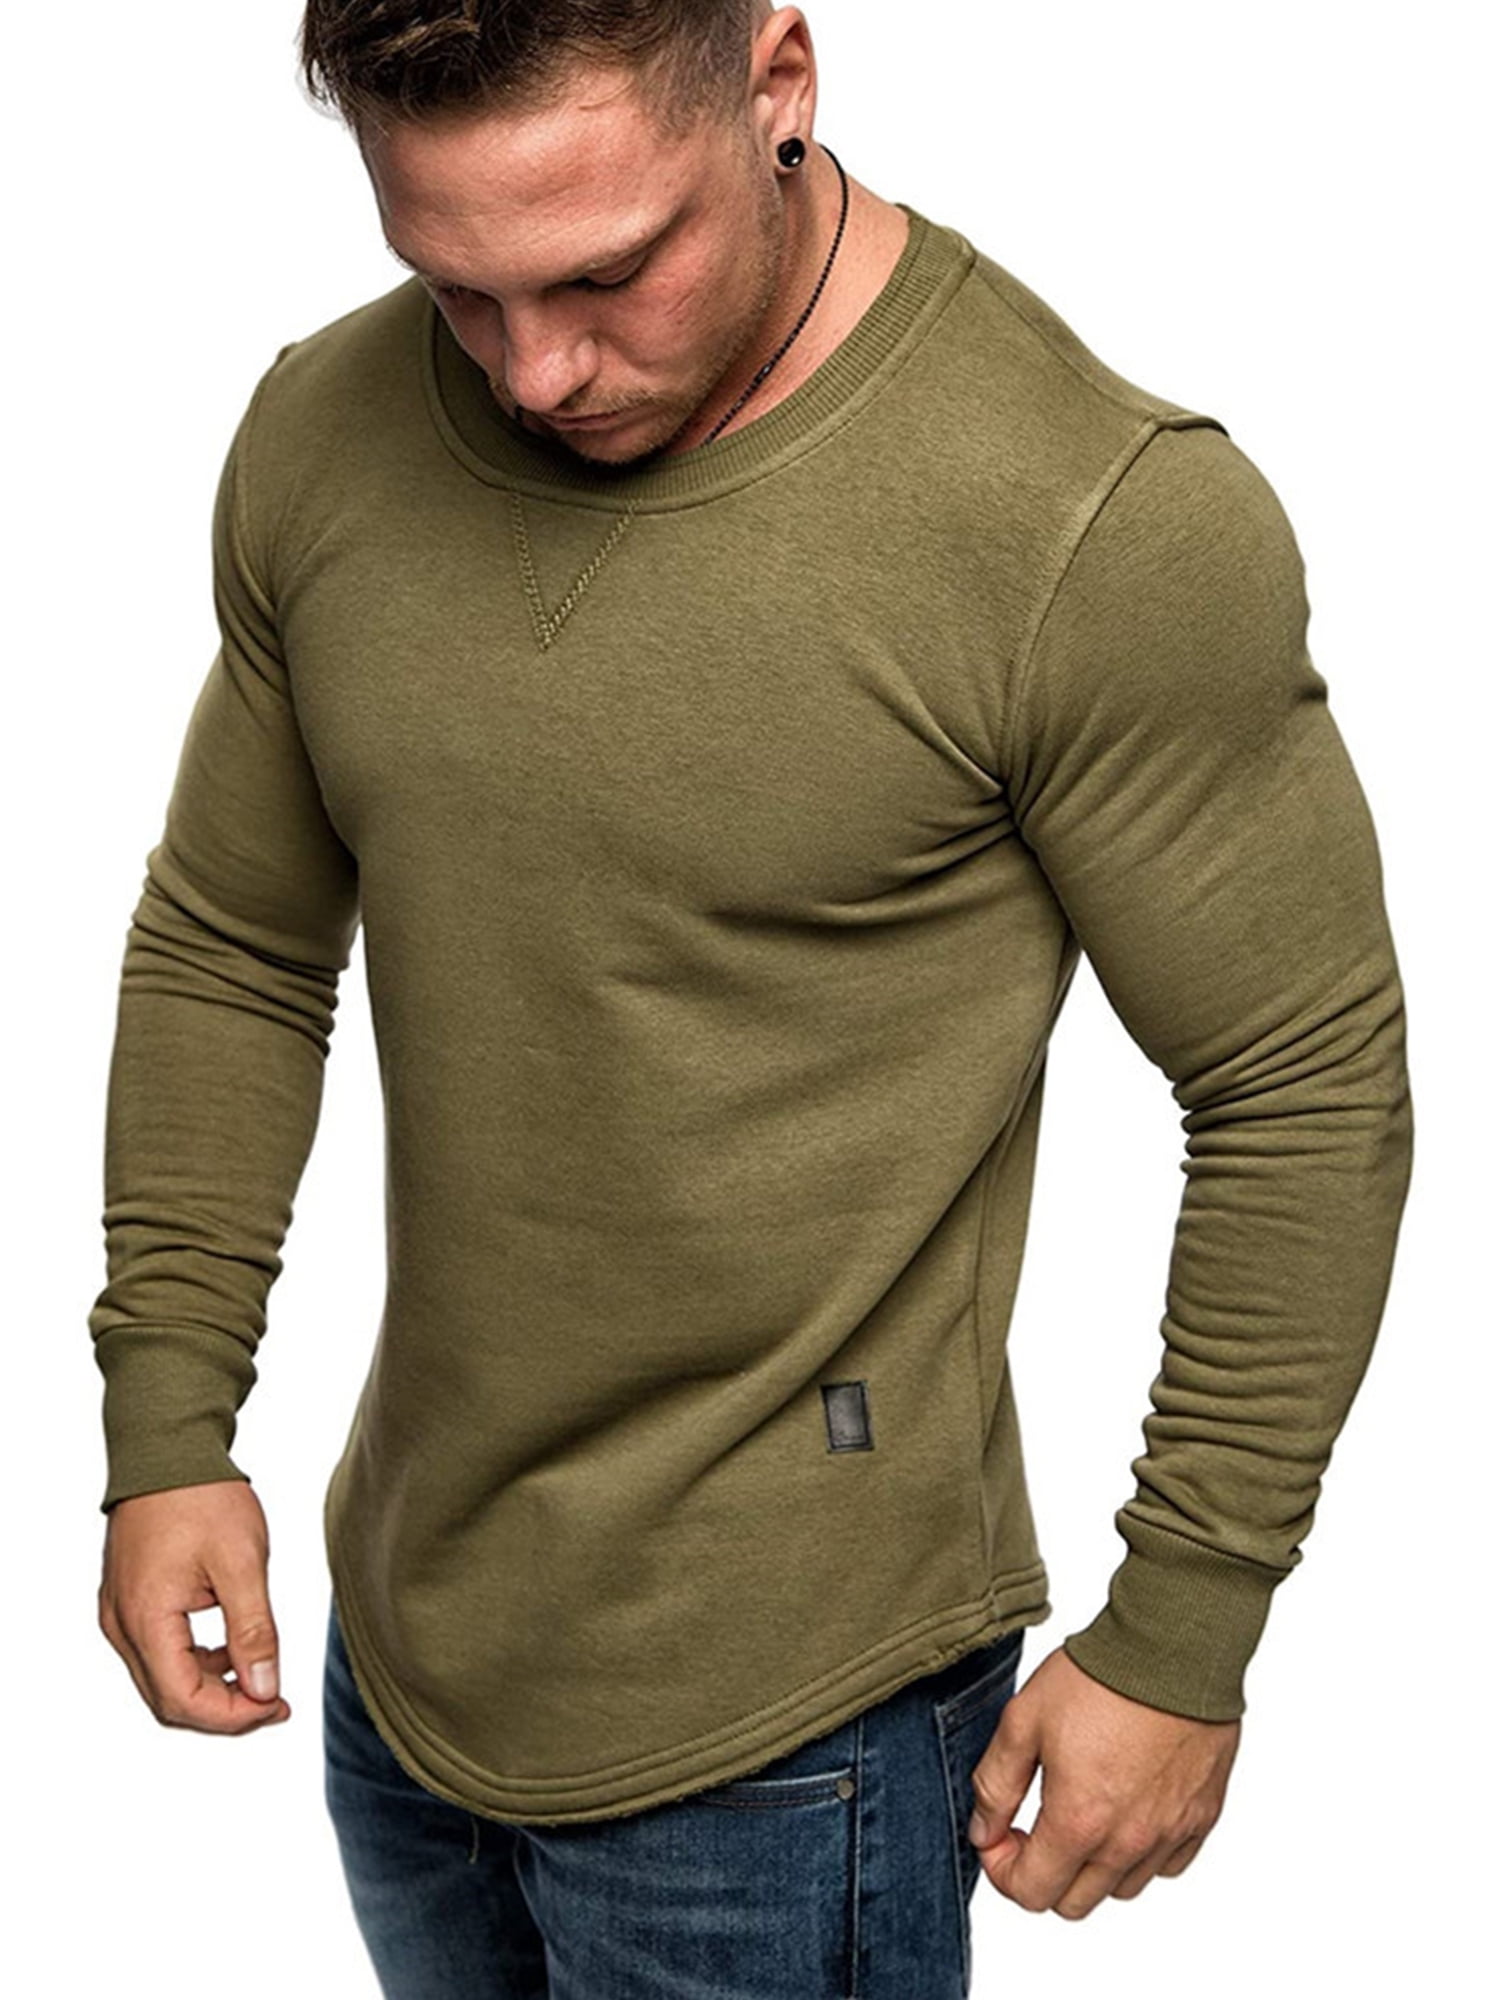 Mens Muscle Long Sleeve T-Shirt Gym Sports Casual Plain Slim Fit Tops ...